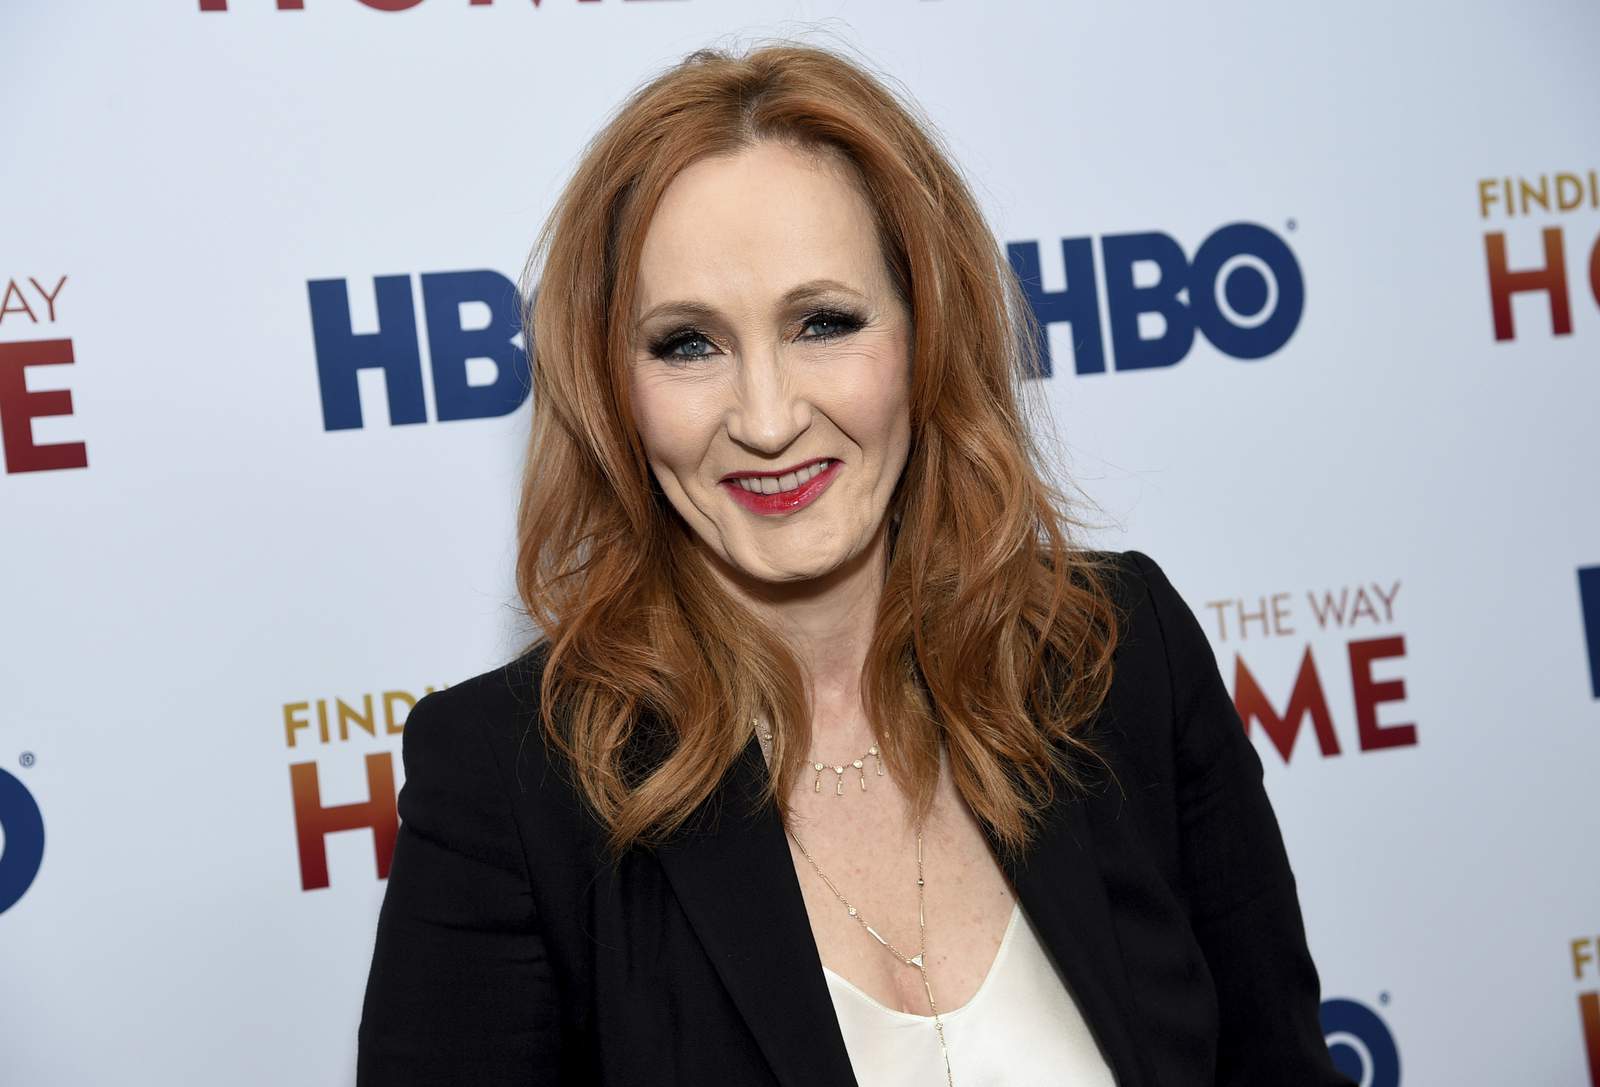 JK Rowling responds to critics over her transgender comments